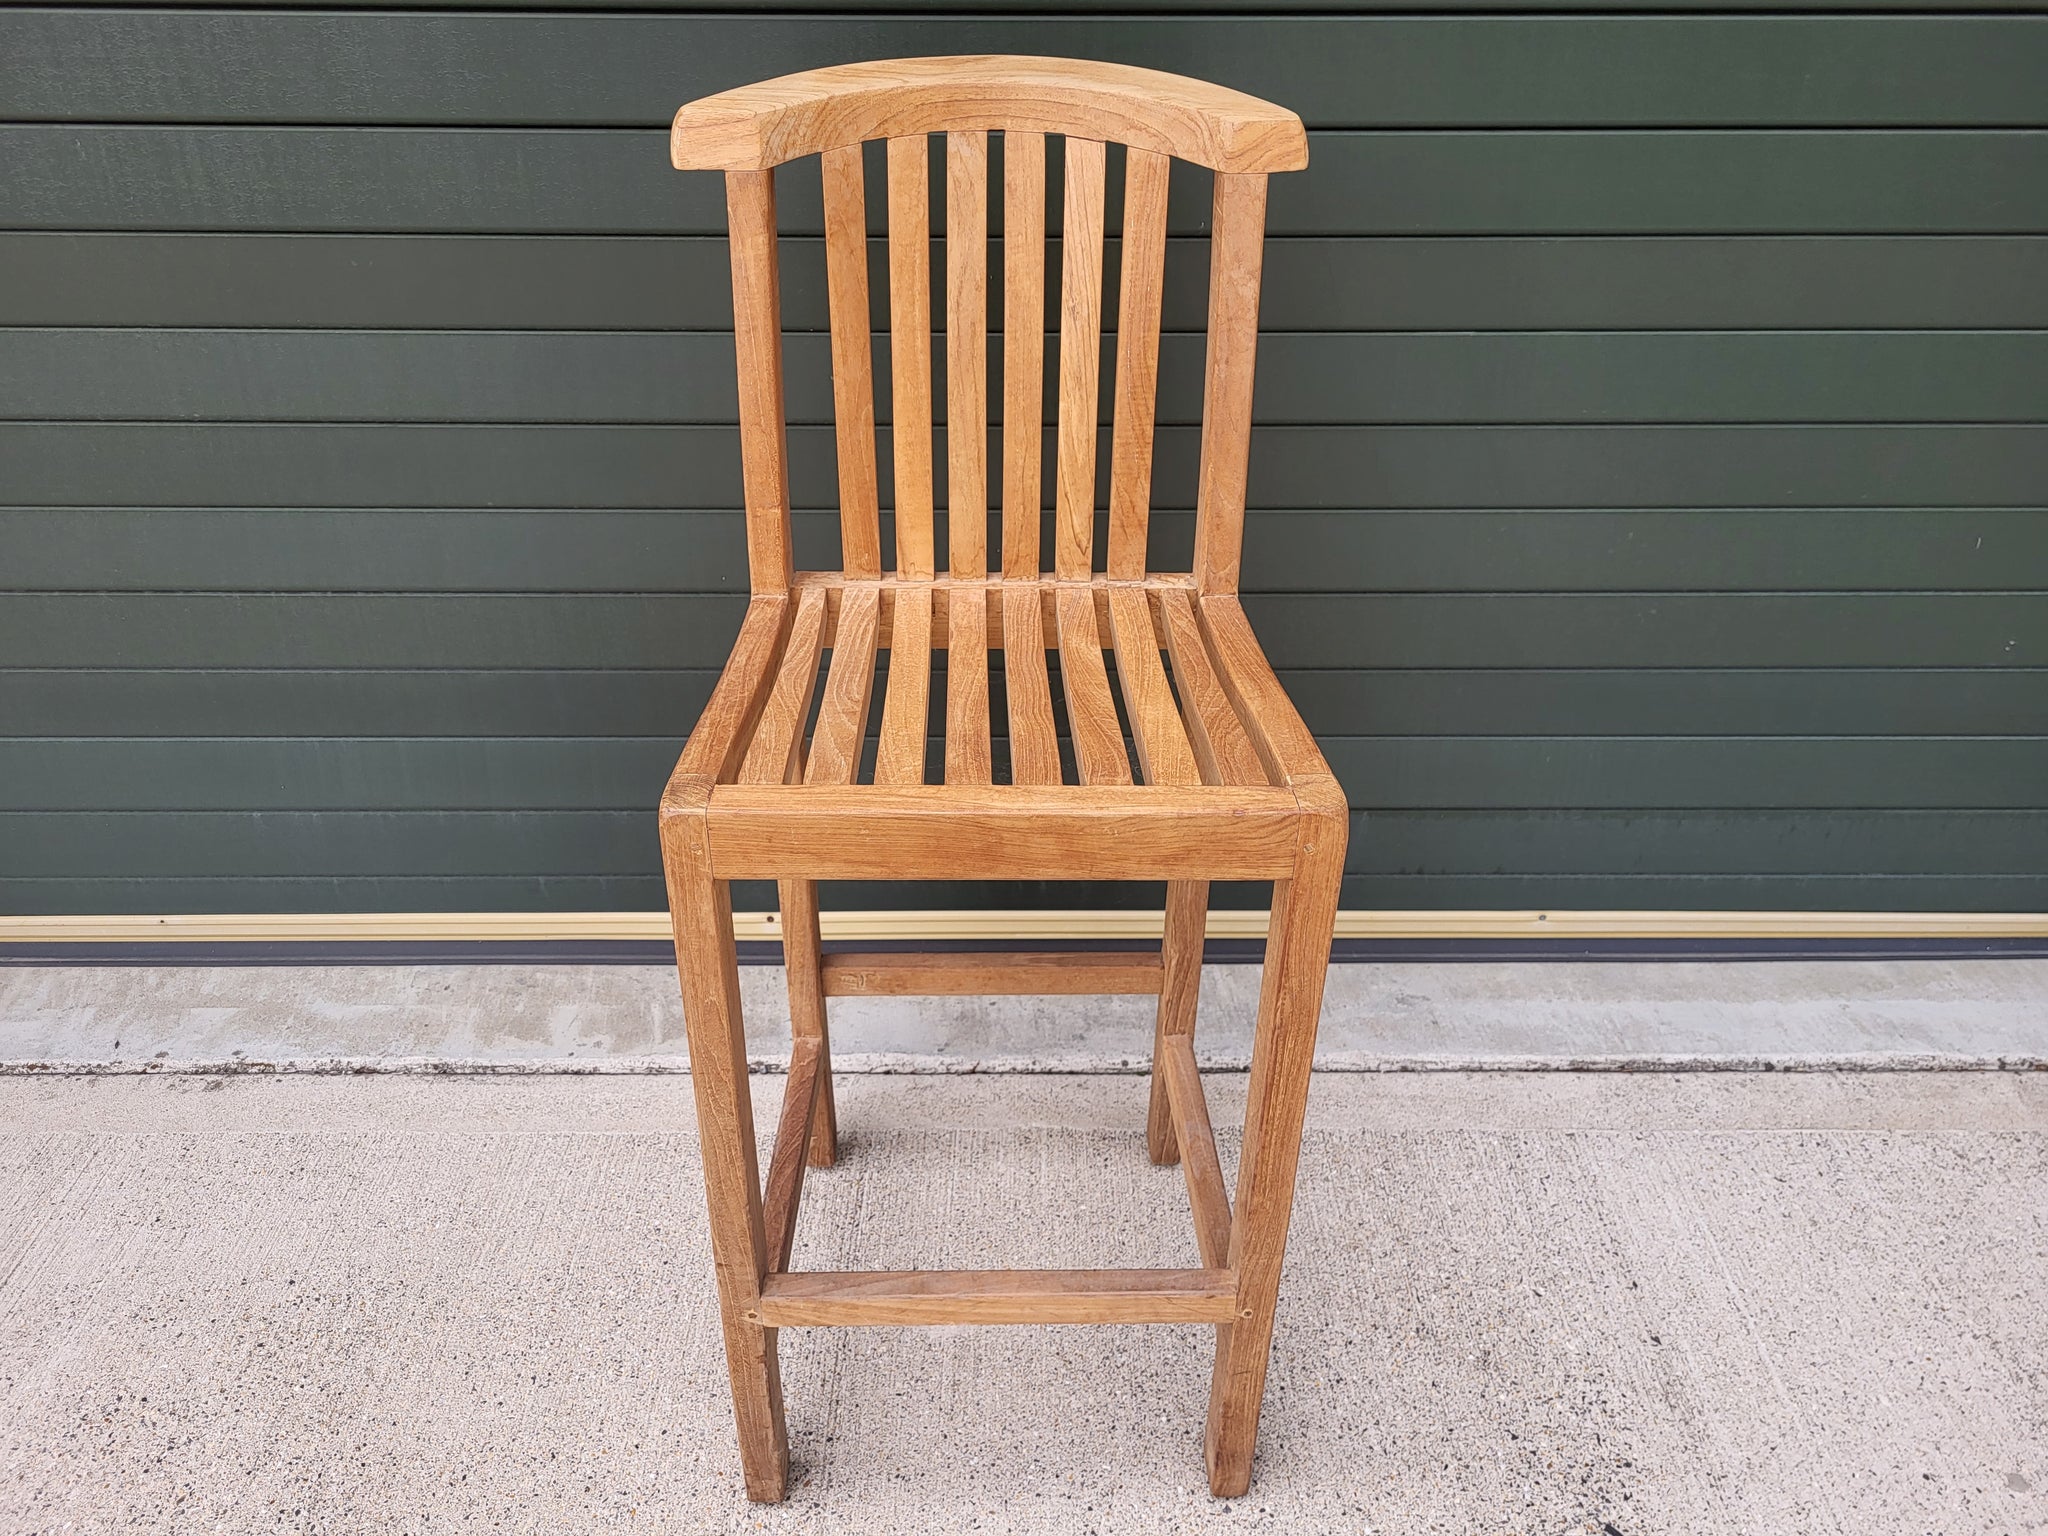 SALE - Winchester Teak Bar Chair - Without Arms - Discontinued style (23031)